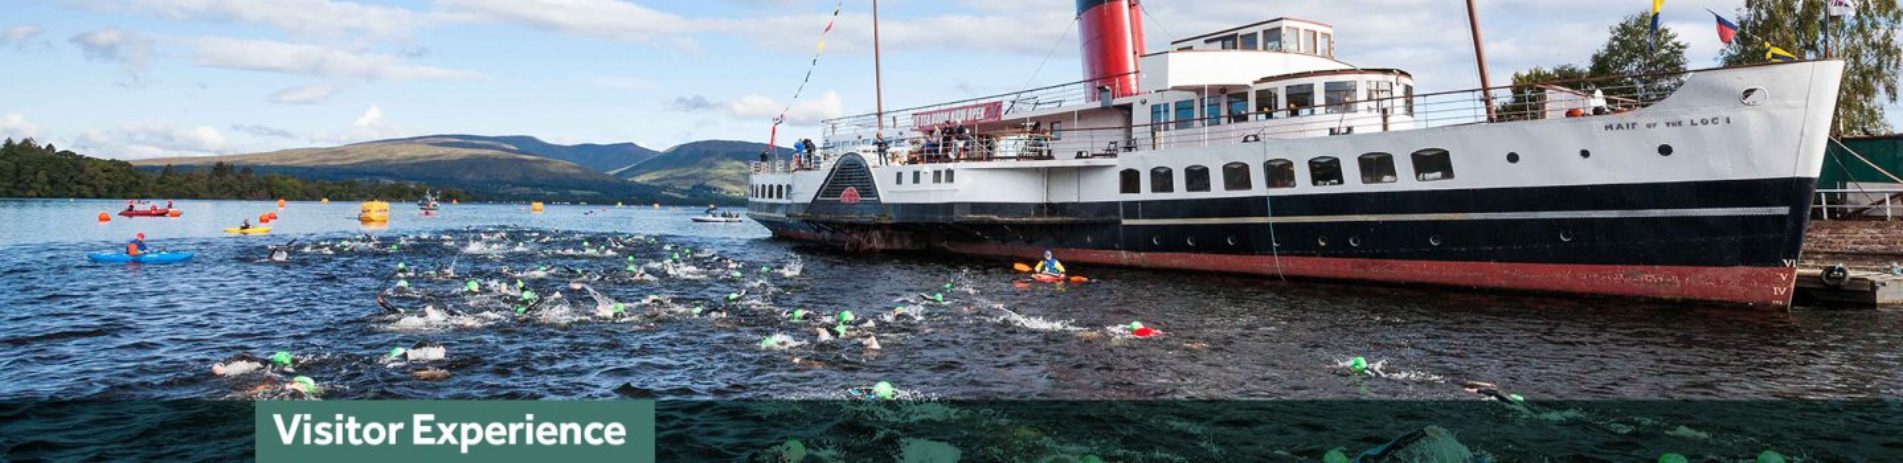 great-scottish-swim-event-on-loch-long-dozens-of-swimmers-wearing-colourful-caps-swim-in-water-next-to-maid-of-the-loch-steamship